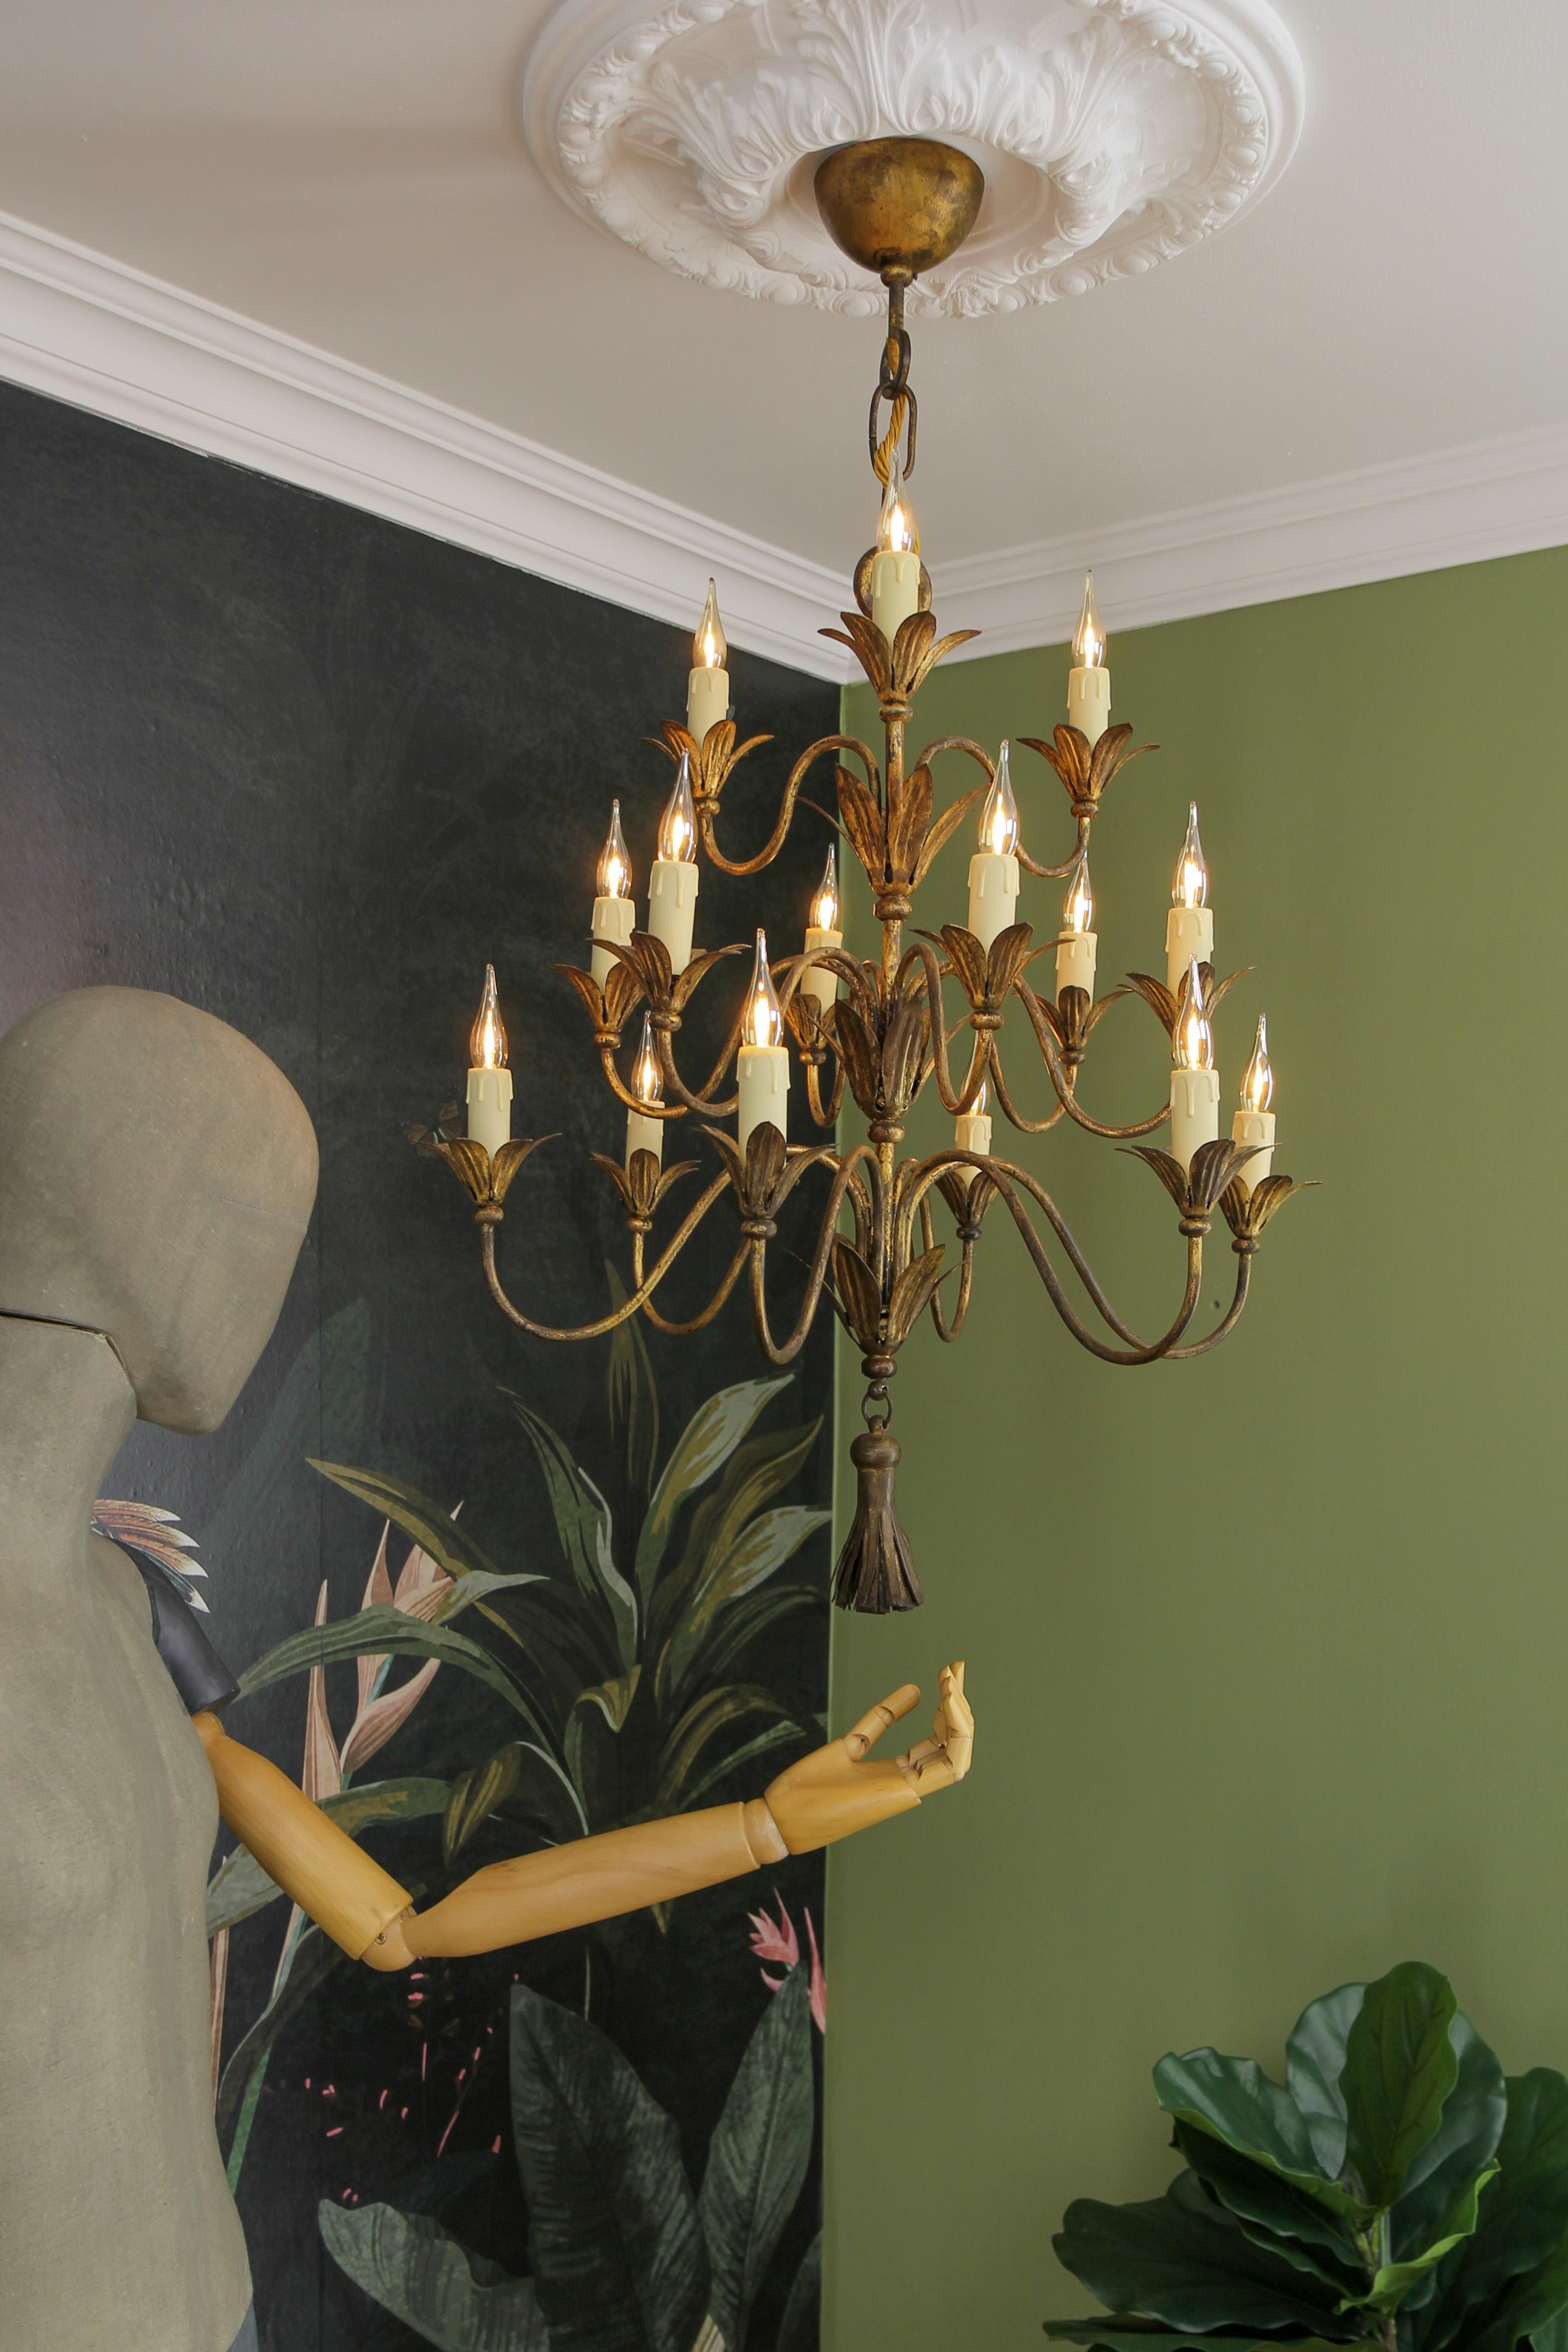 Mid-20th Century French Gilt Metal Fifteen-Light Chandelier, ca. 1950s For Sale